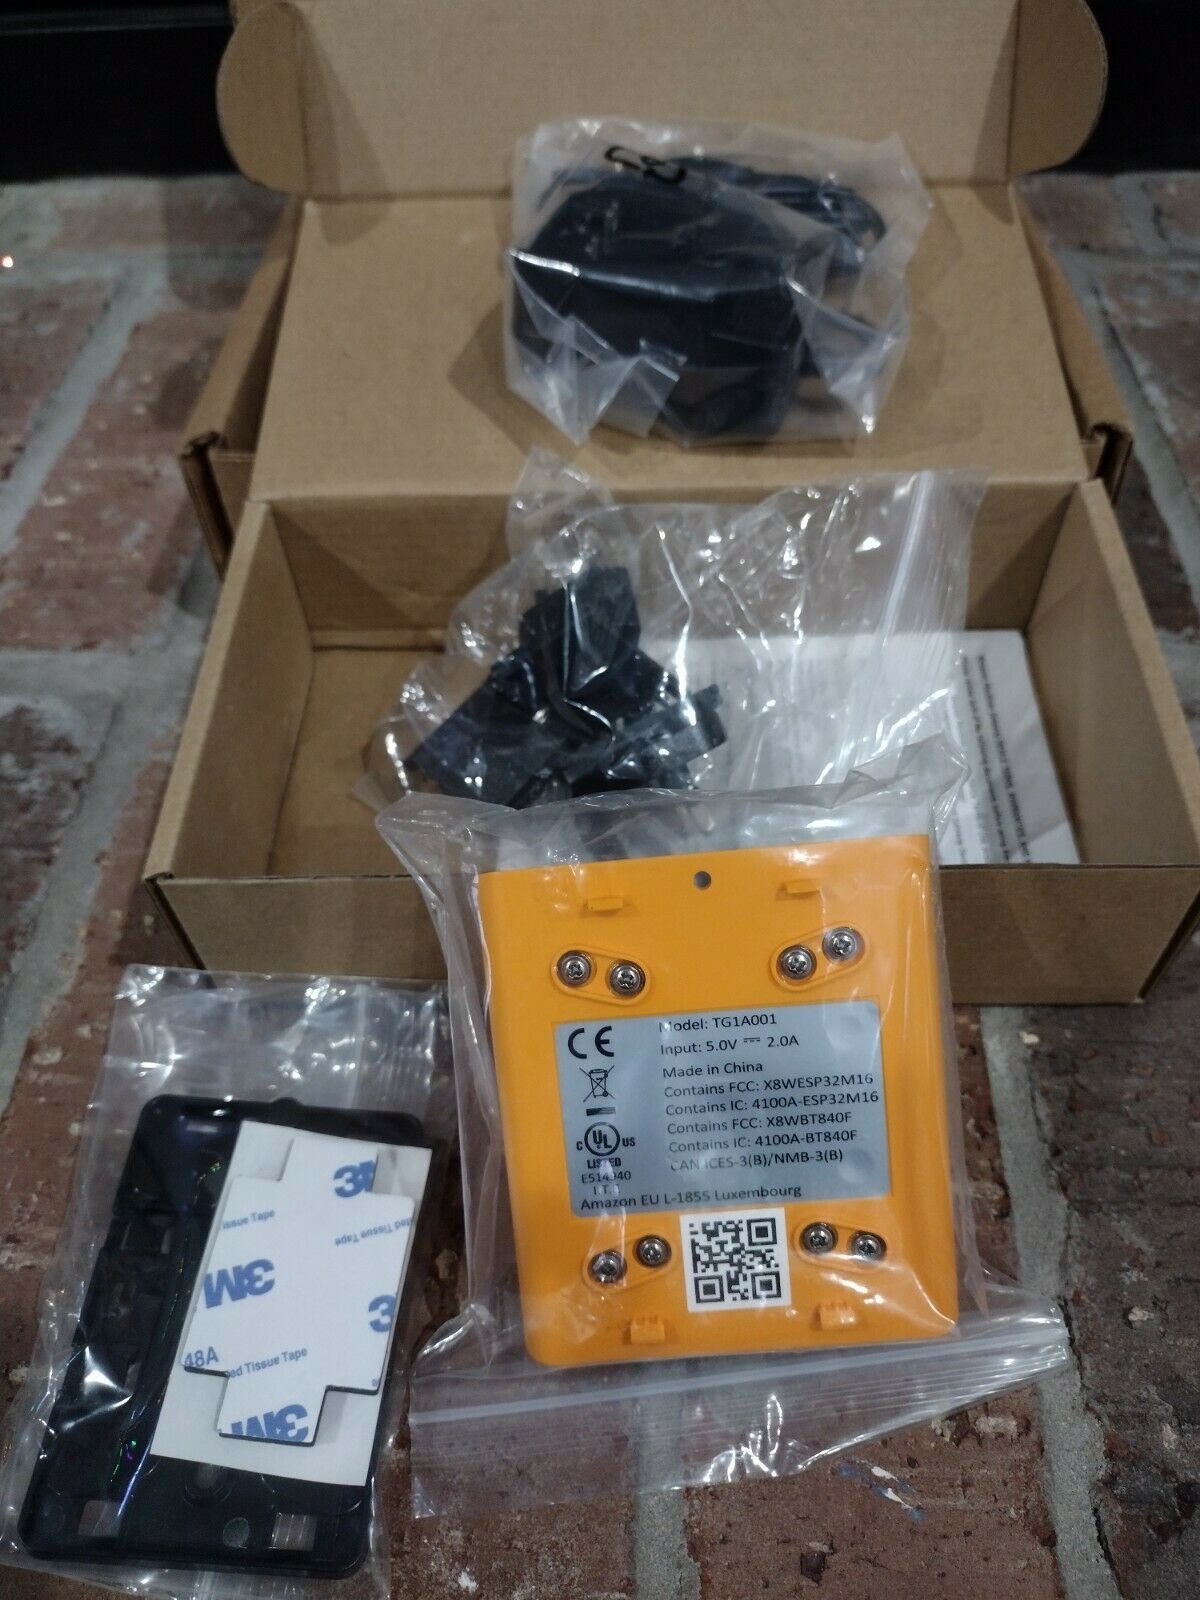 Amazon Monitron Starter Kit, an end-to-end system for equipment monitoring